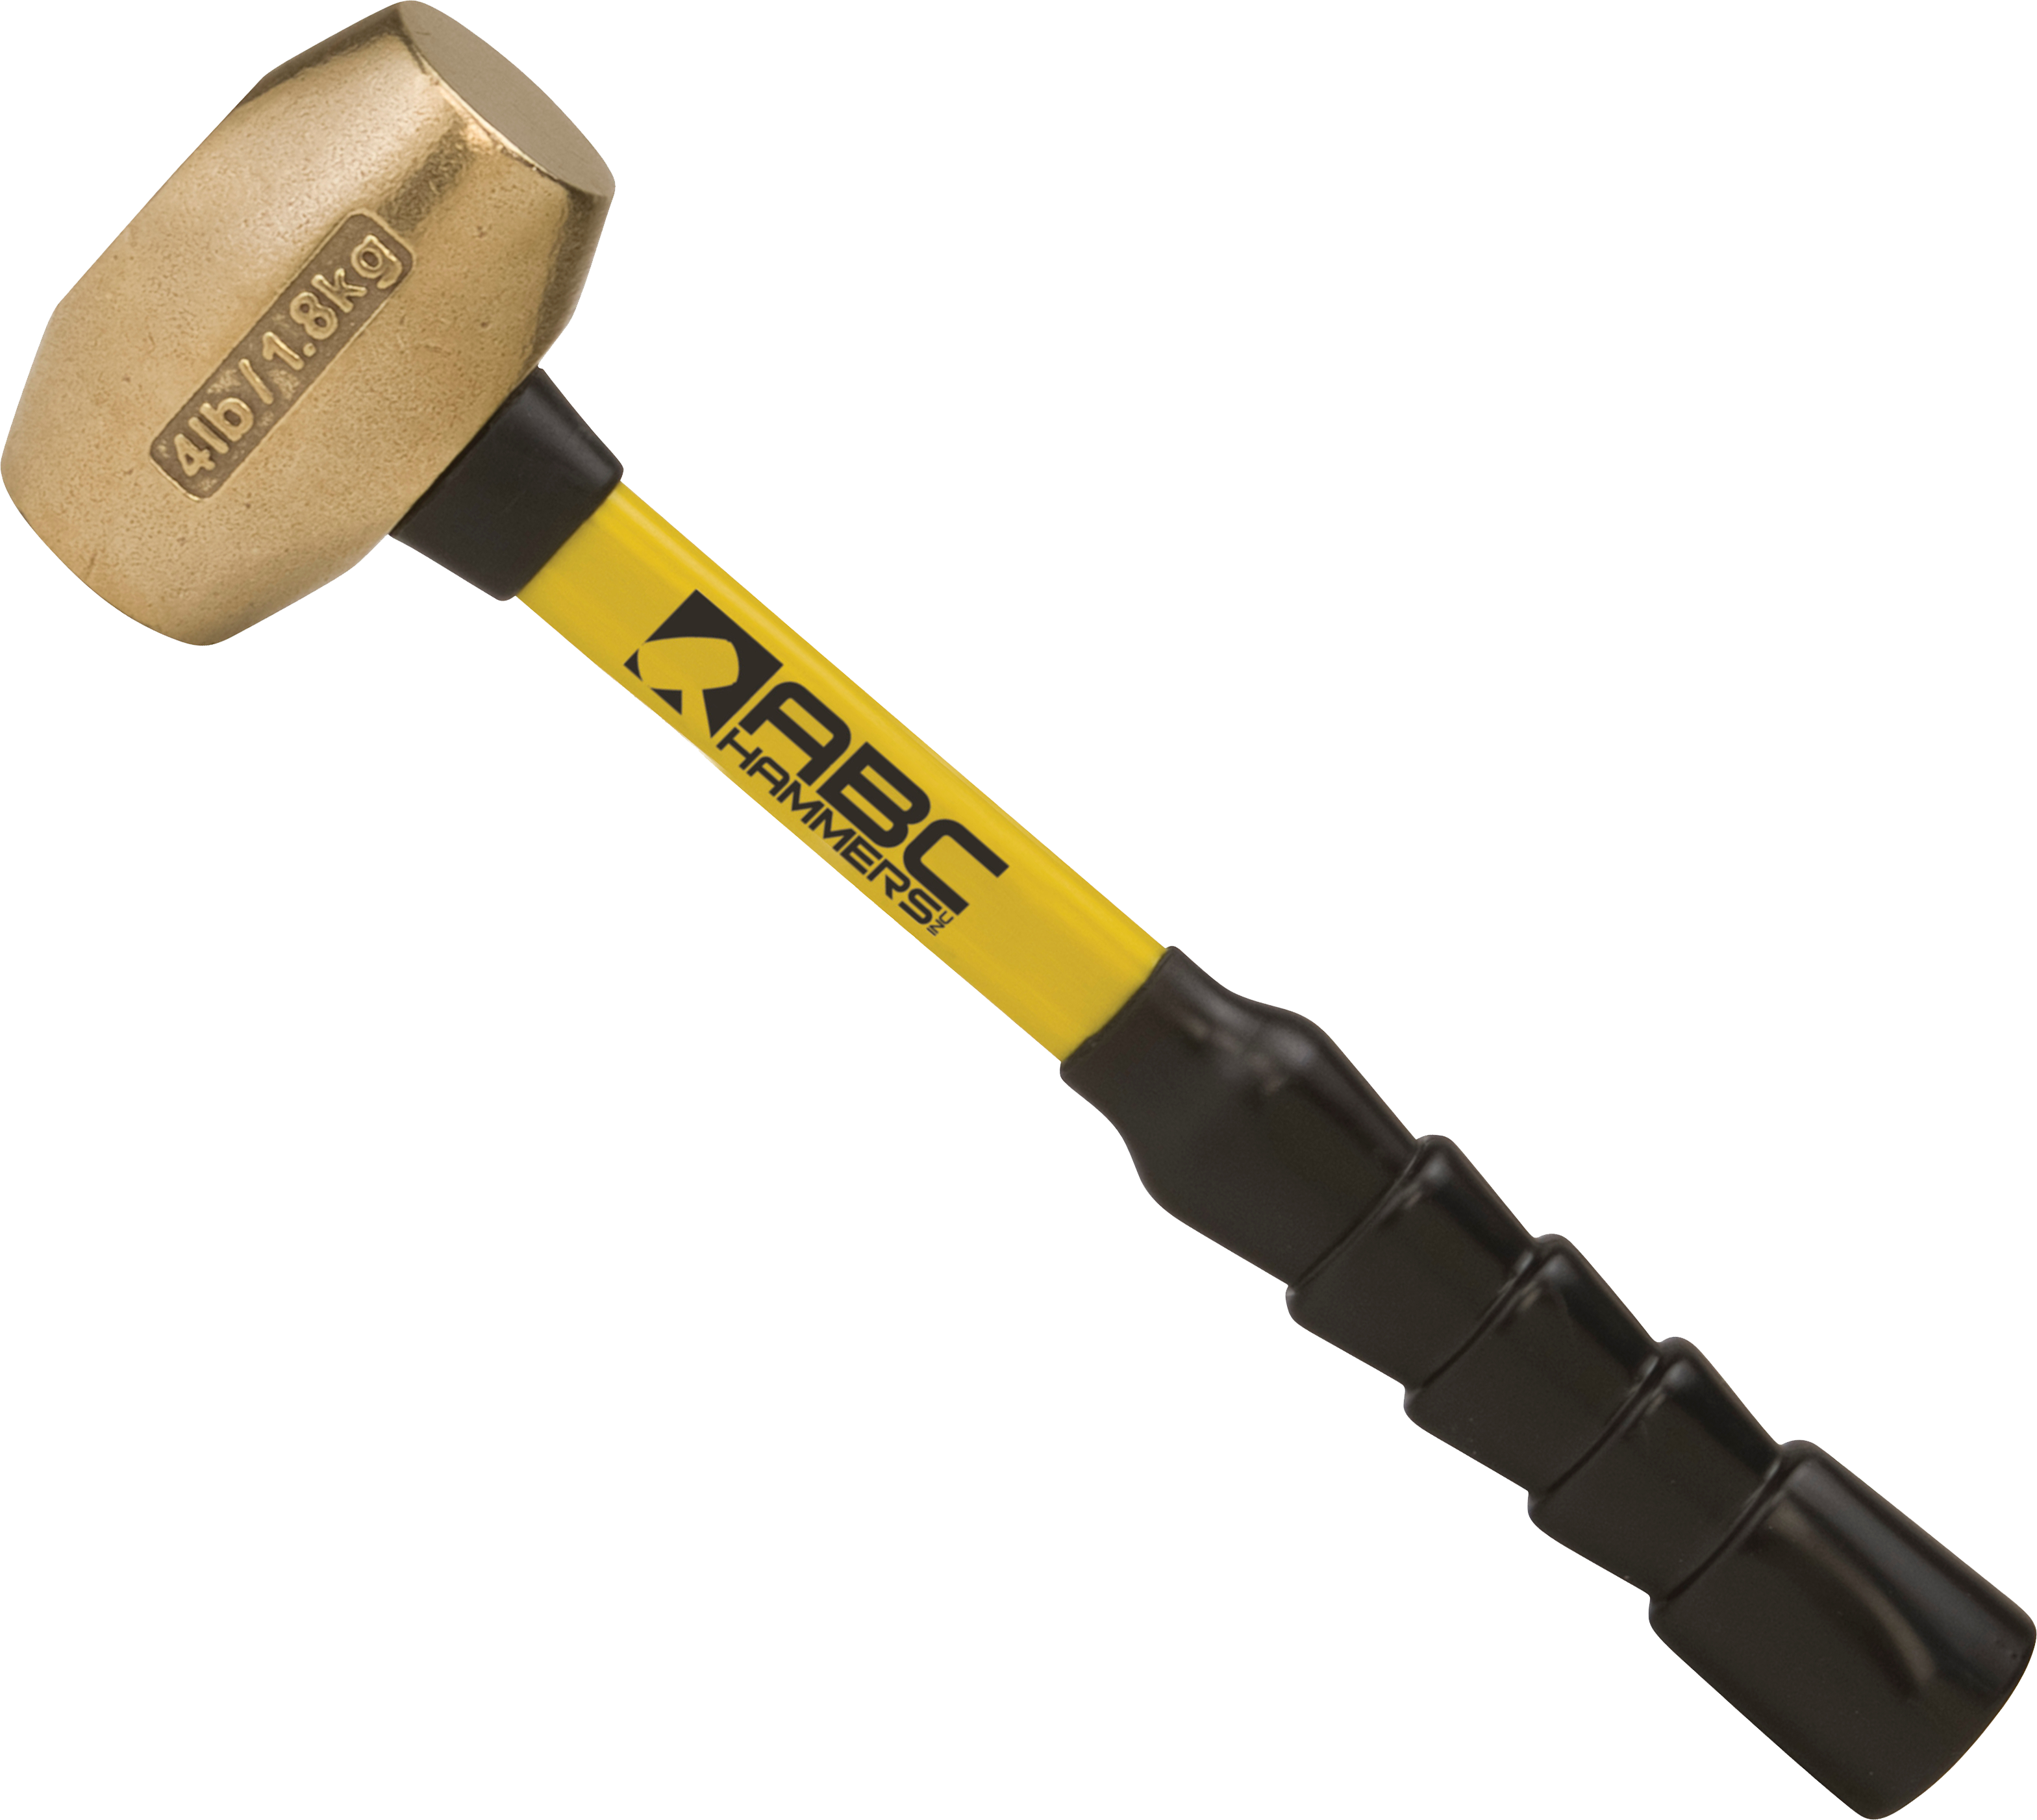 Roughneck Supply - Product Line ABC HAMMERS INC.